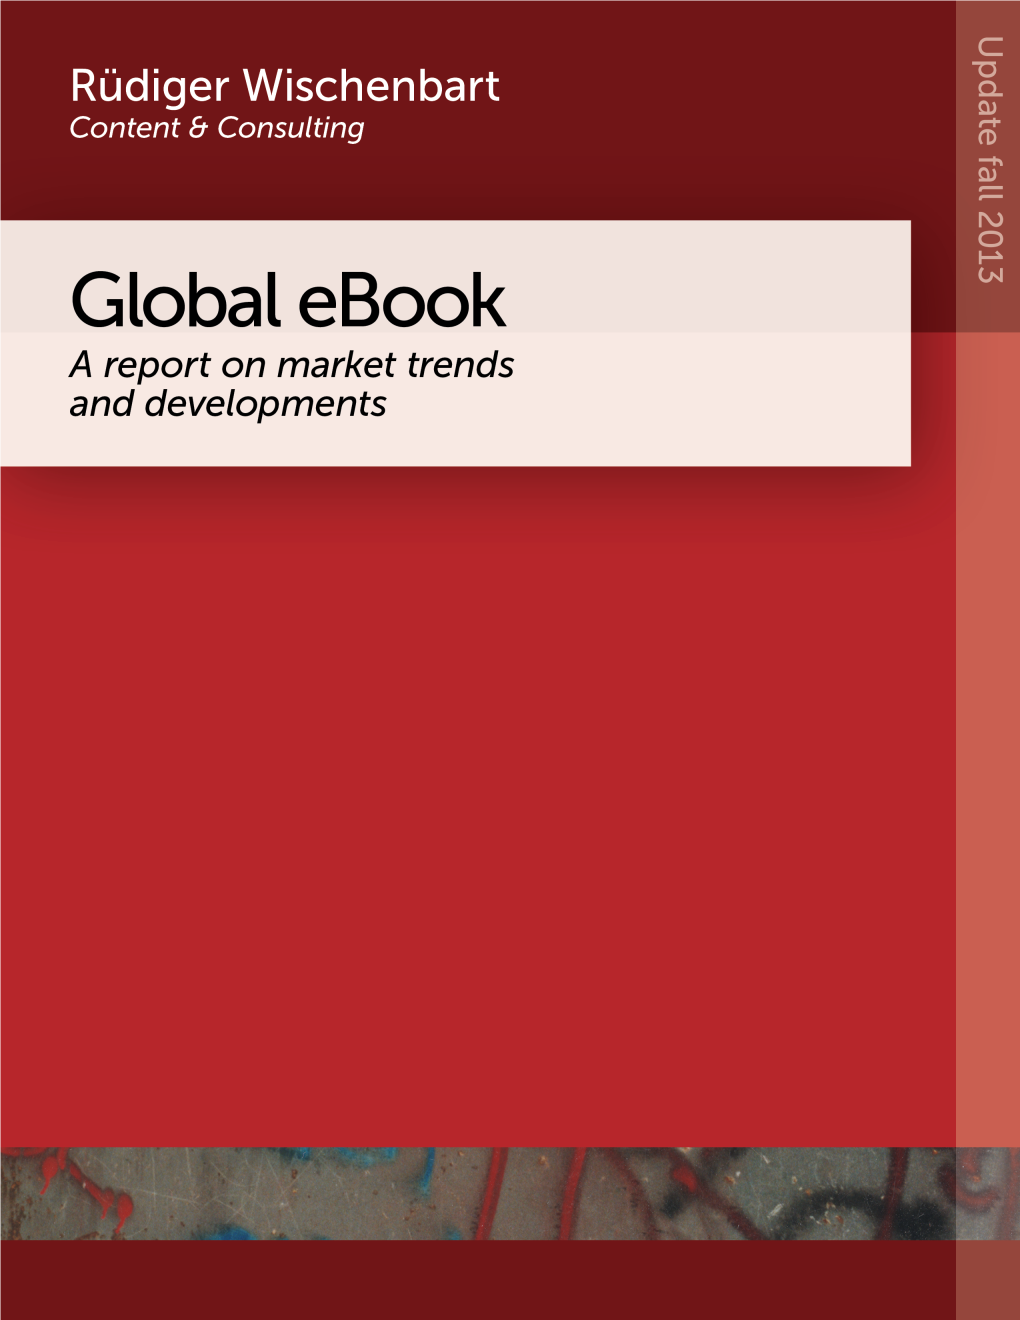 The Global Ebook Report We Look Forward to Talking to You